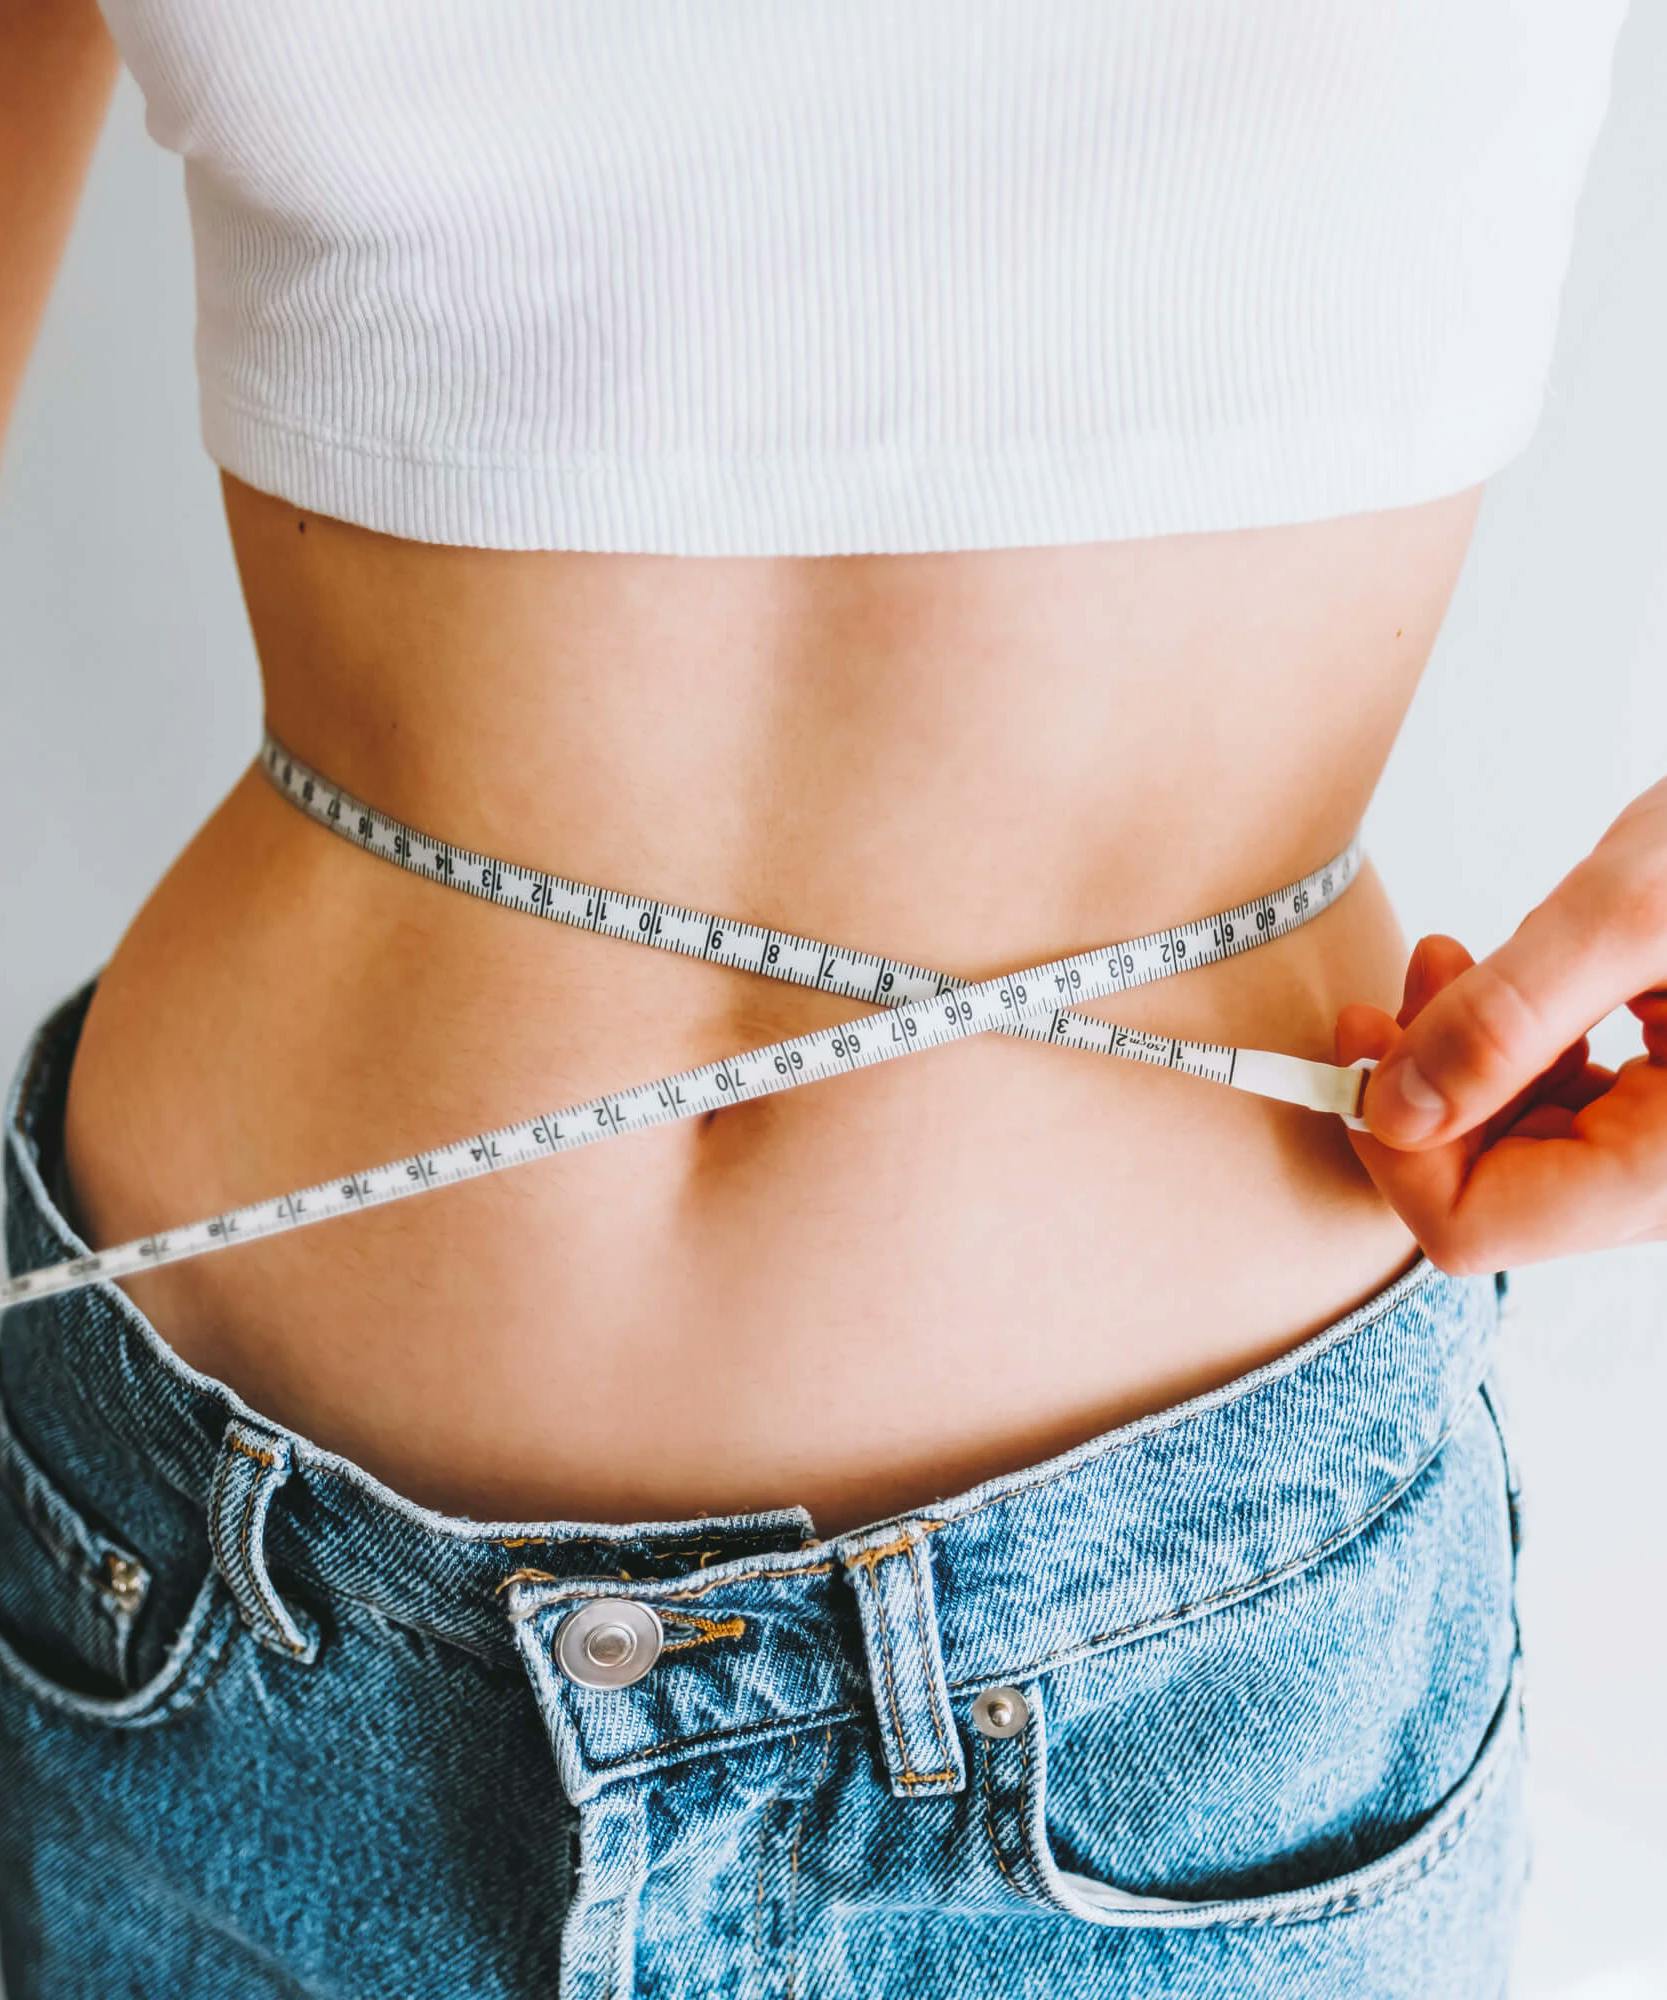 Weight Loss Alone Isn’t A Good Metric For Health Or Happiness